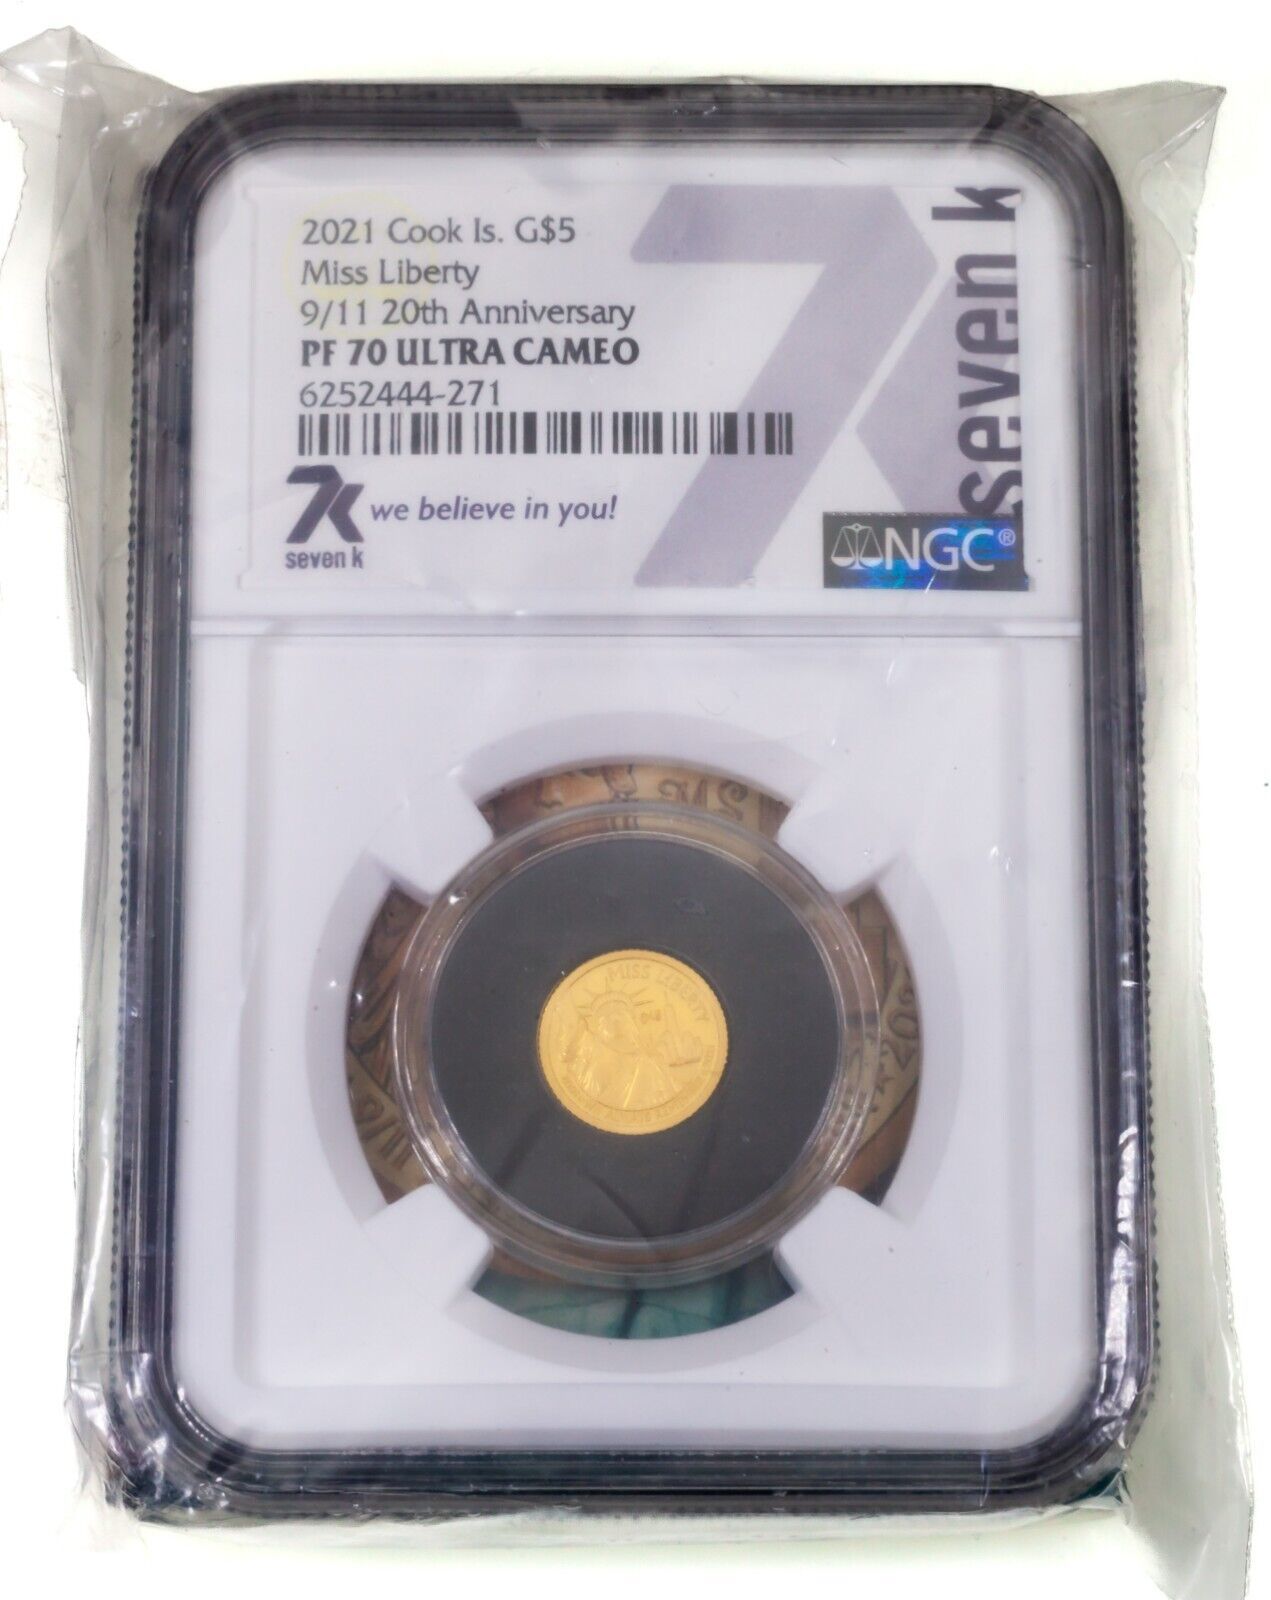 Primary image for 2021 Cook Islands G$5 Miss Liberty 1/2 g Gold Coin Graded by NGC as PF70 UCam